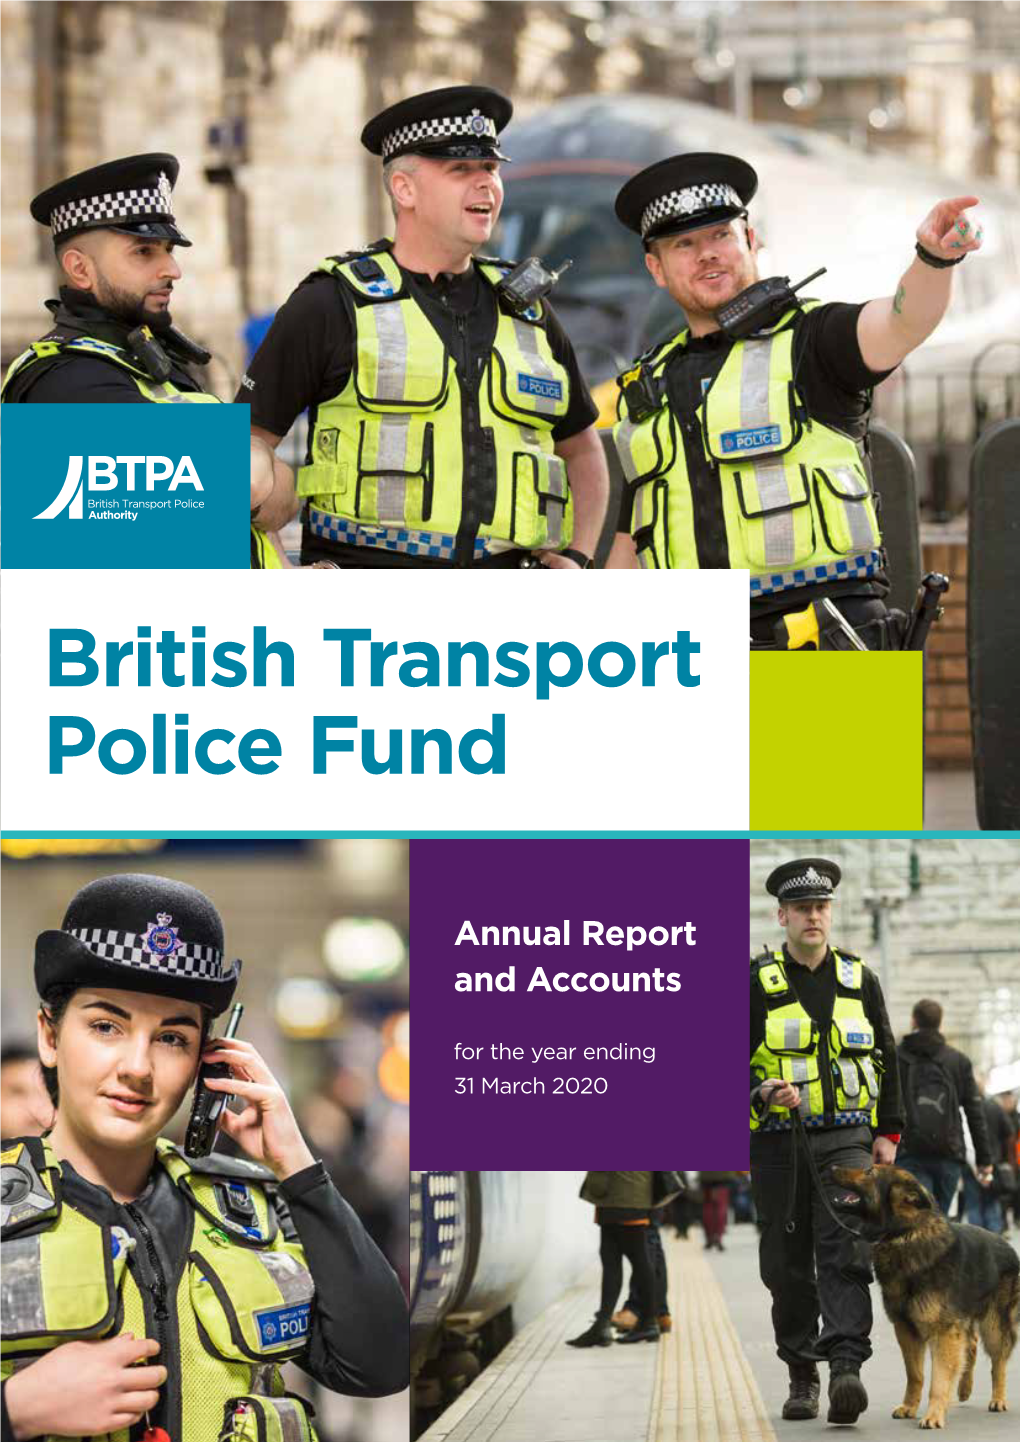 British Transport Police Fund Annual Report and Accounts for the Year